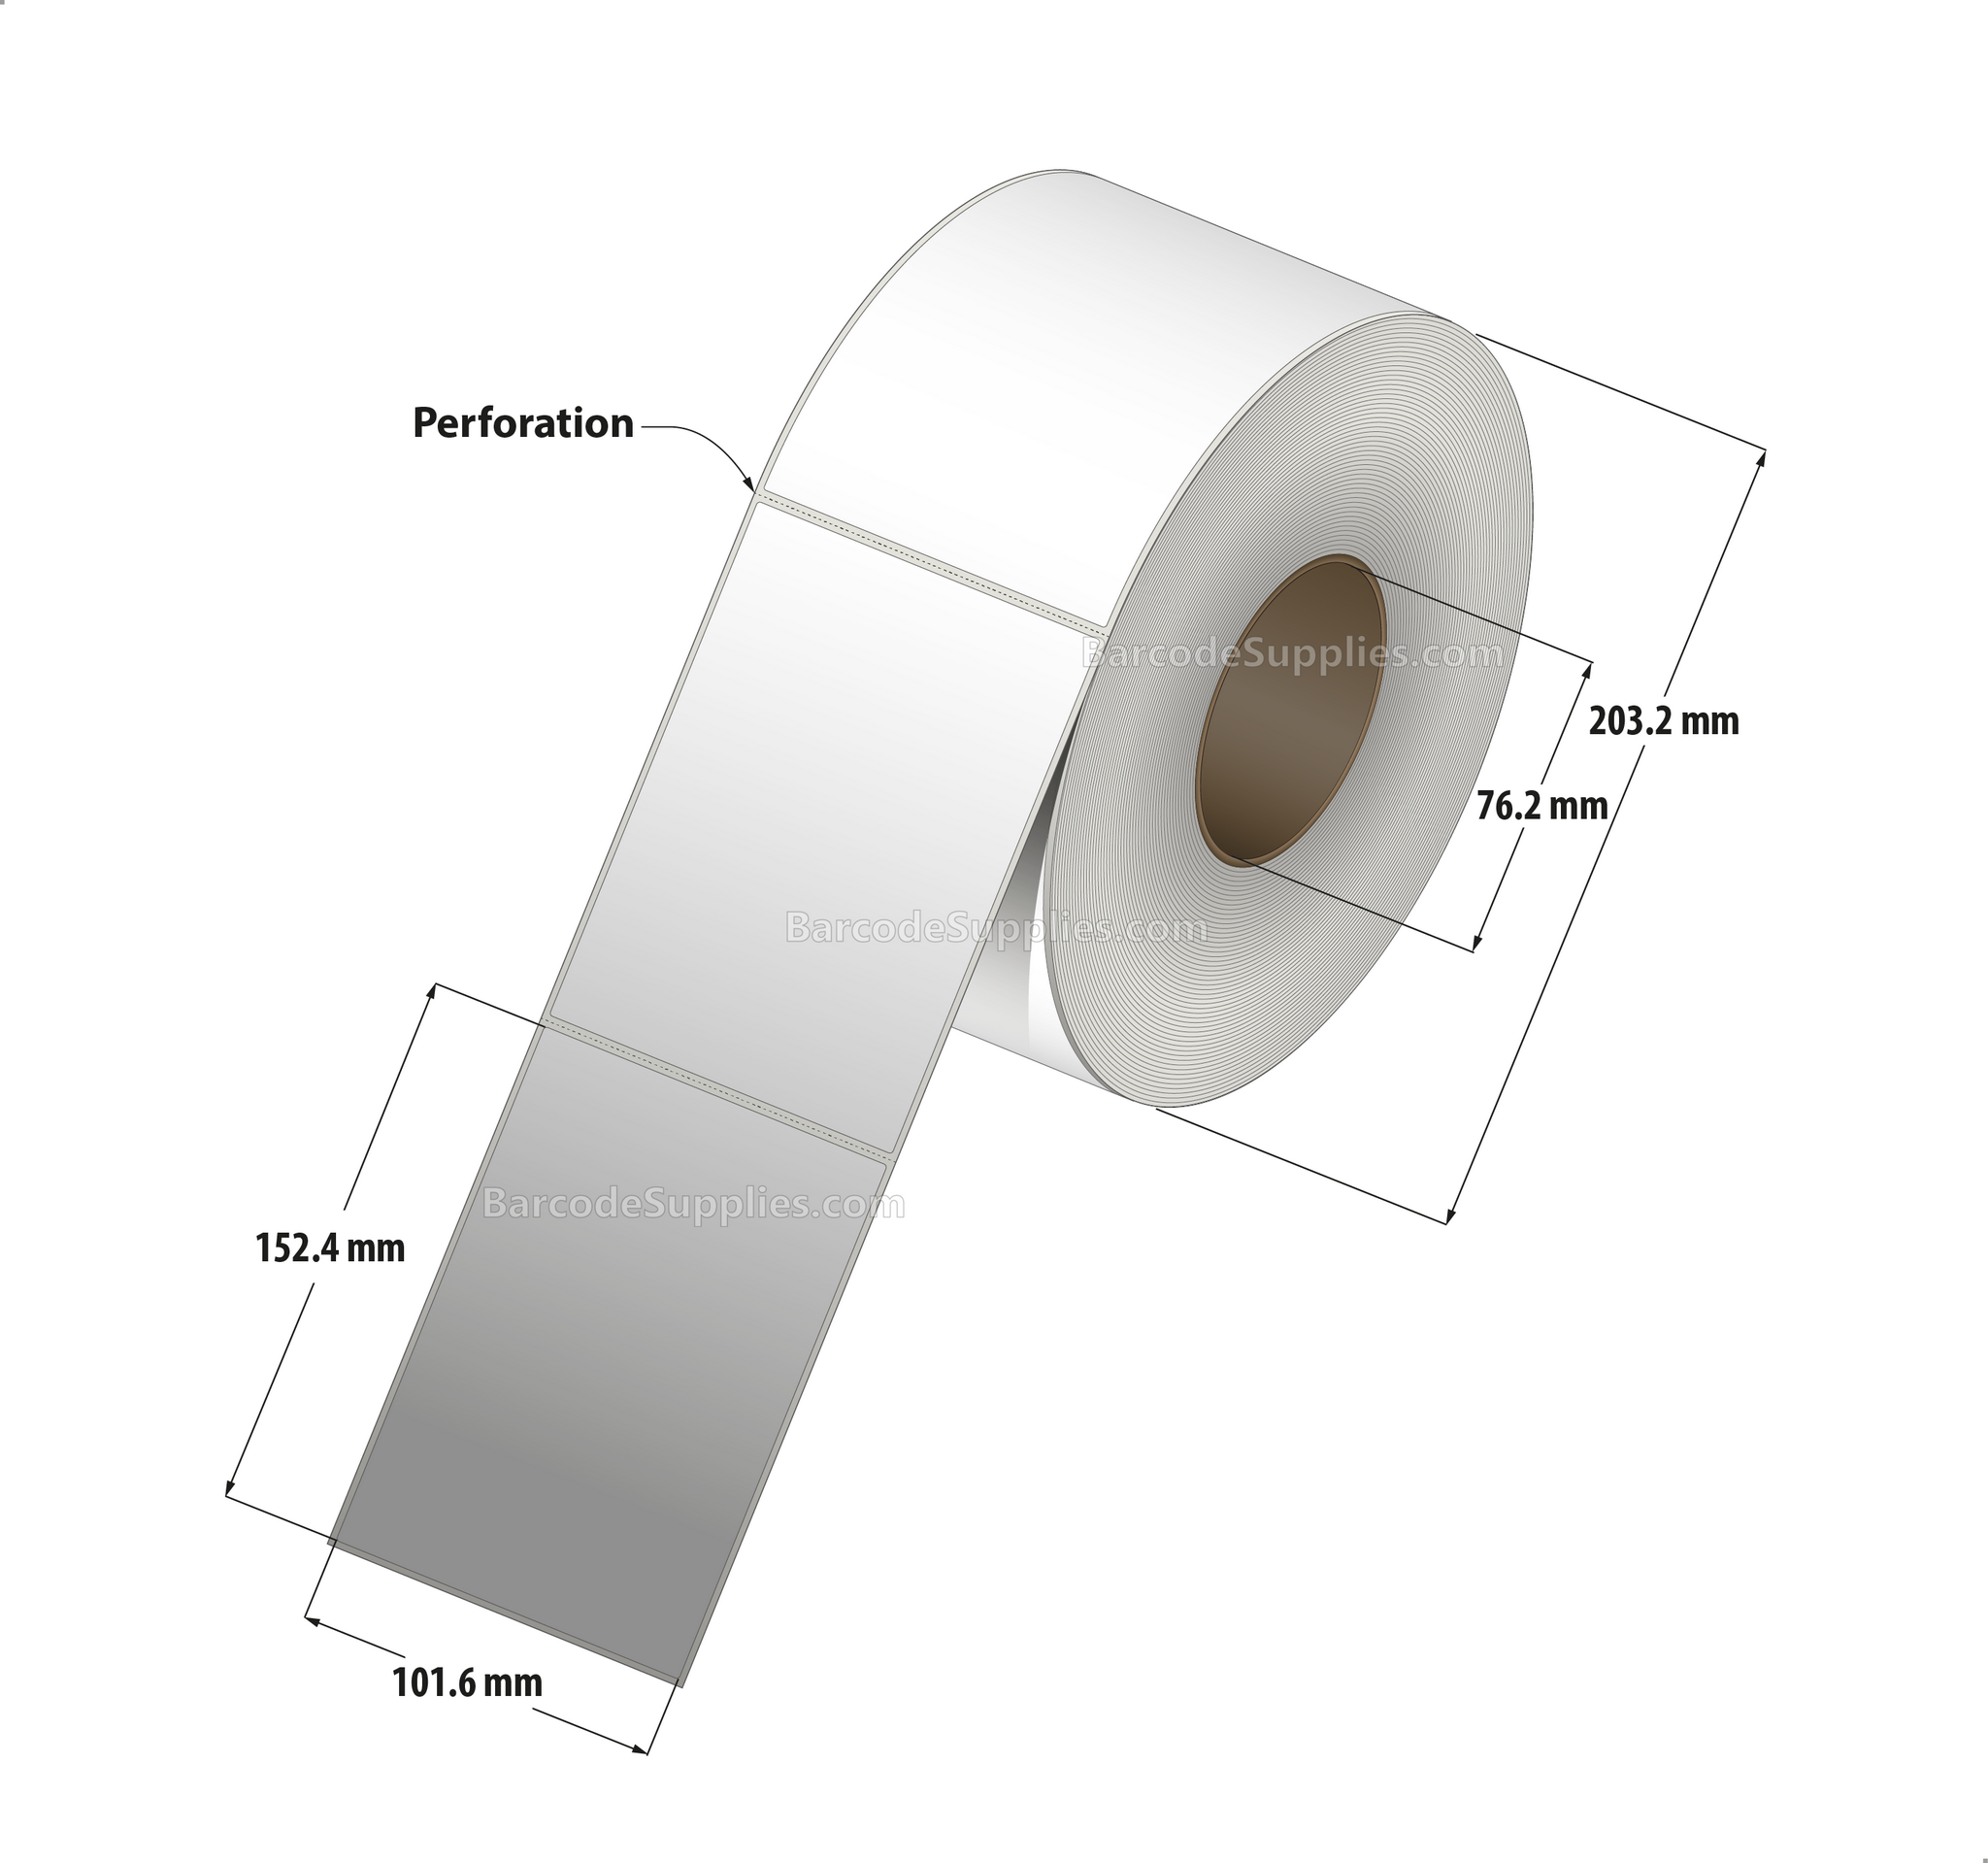 4 x 6 Thermal Transfer White Labels With Hammerlock (Very Aggressive) Adhesive - Perforated - 1000 Labels Per Roll - Carton Of 4 Rolls - 4000 Labels Total - MPN: RH-4-6-1000-3